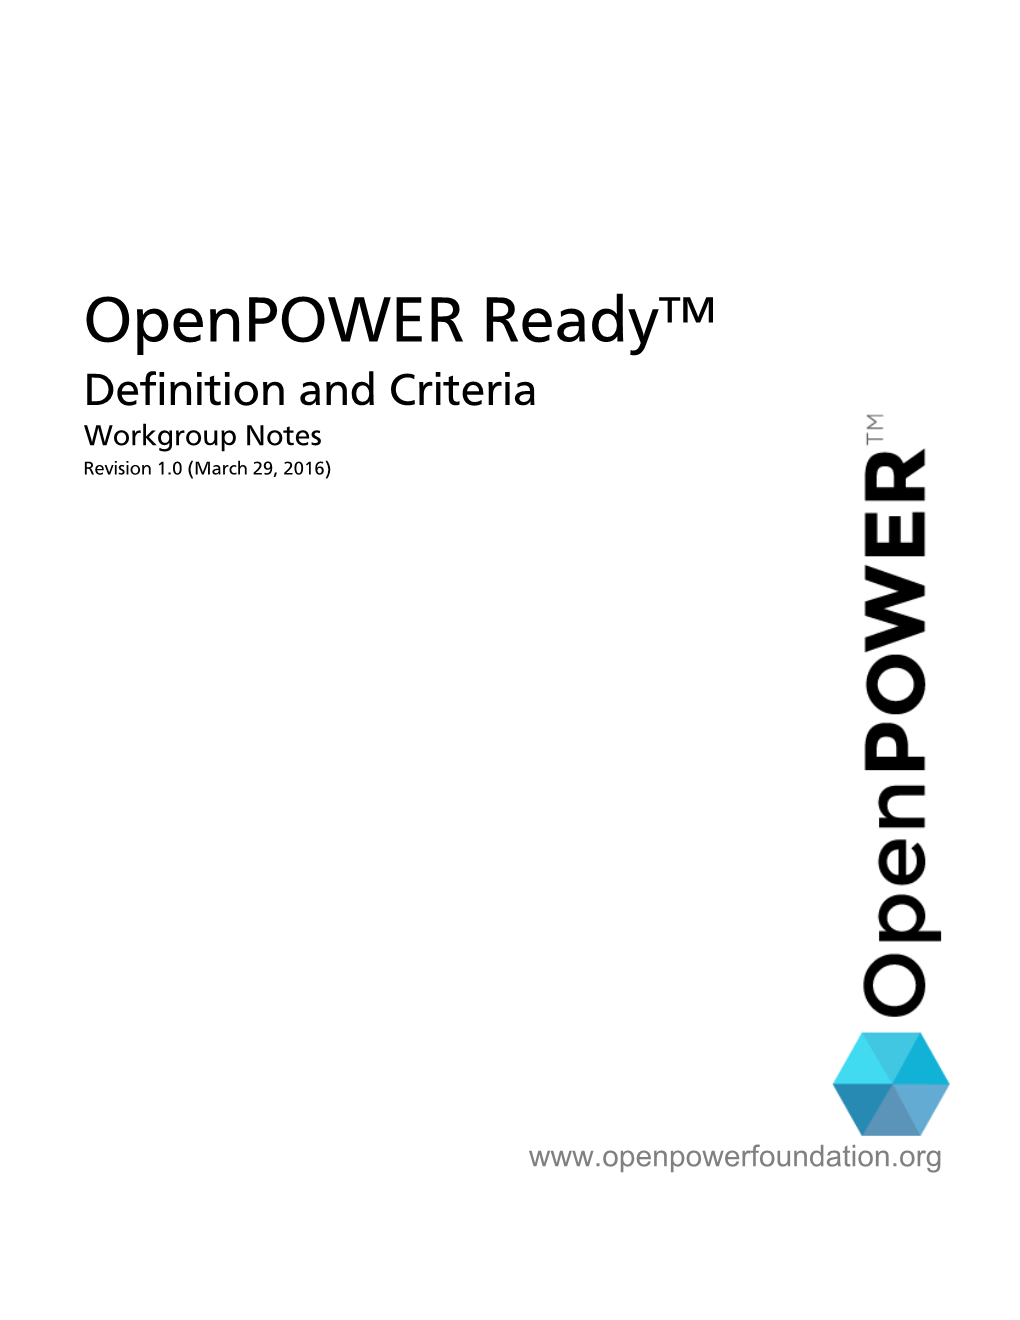 Openpower Ready™ March 29, 2016 Revision 1.0